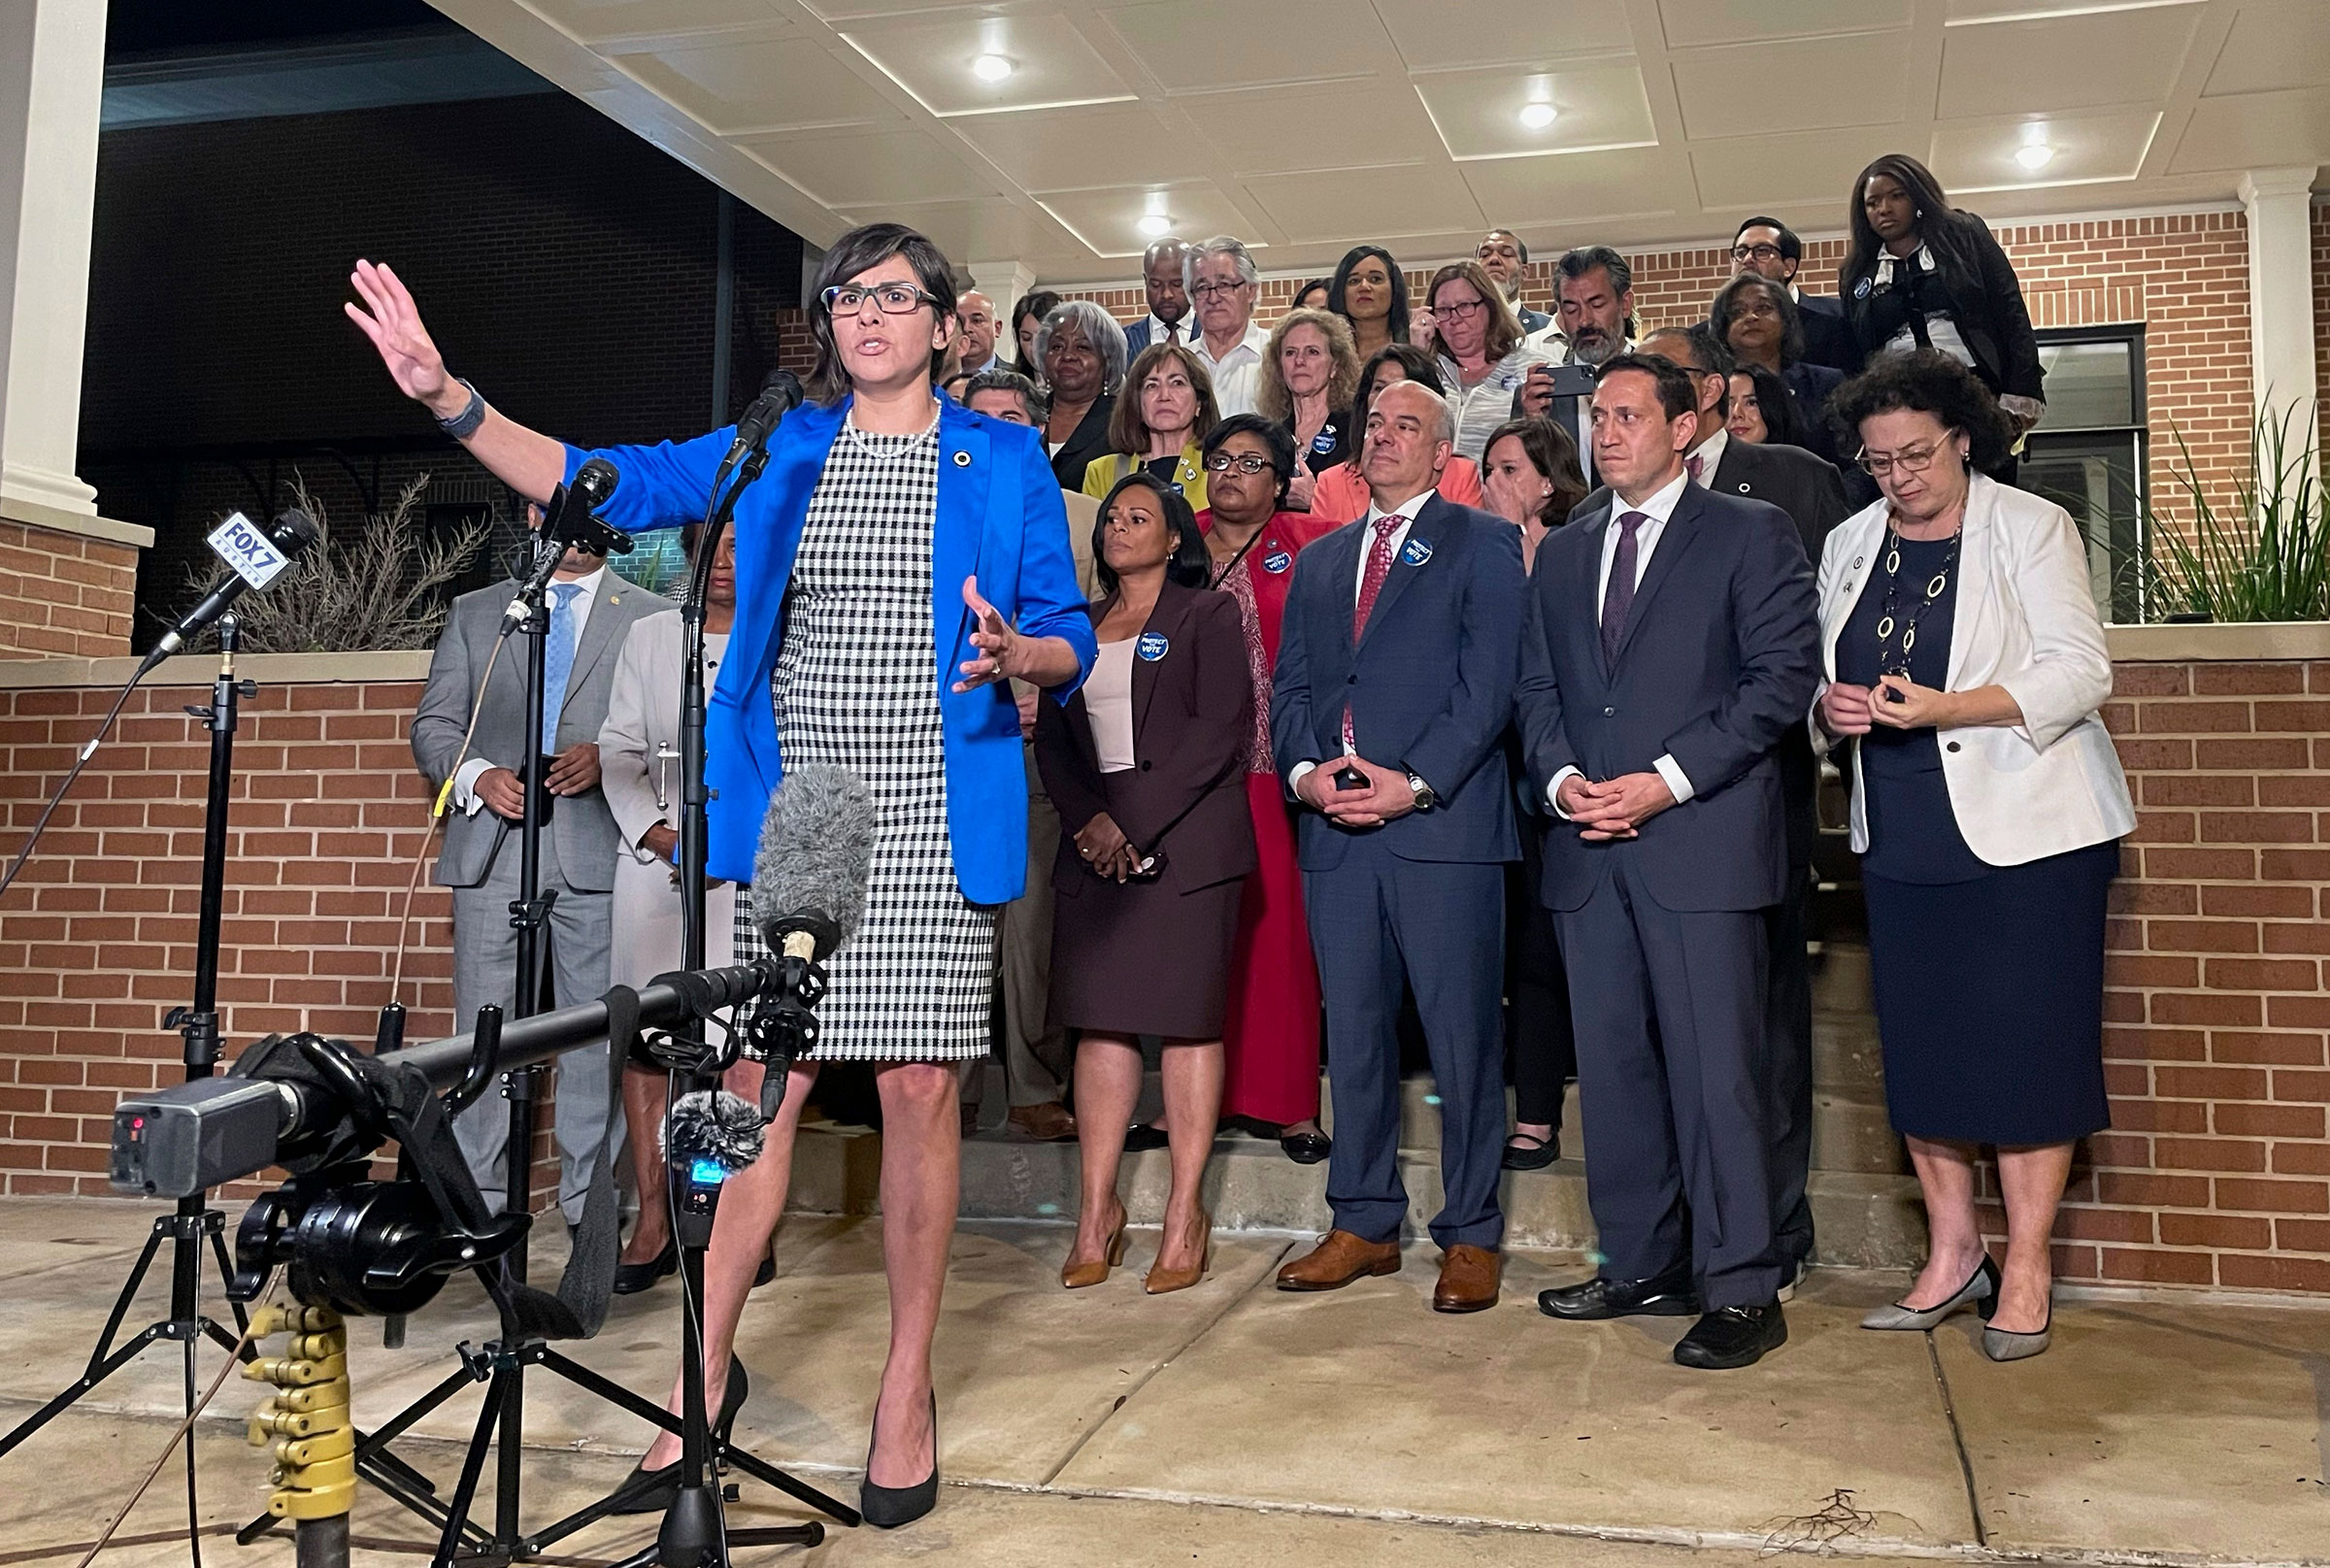 Texas state Rep. Jessica Gonzales speaks during a news conference in Austin, Texas, on early Monday, May 31, 2021, after House Democrats pulled off a dramatic, last-ditch walkout and blocked one of the most restrictive voting bills in the U.S. from passing before a midnight deadline. (Acacia Coronado—AP)